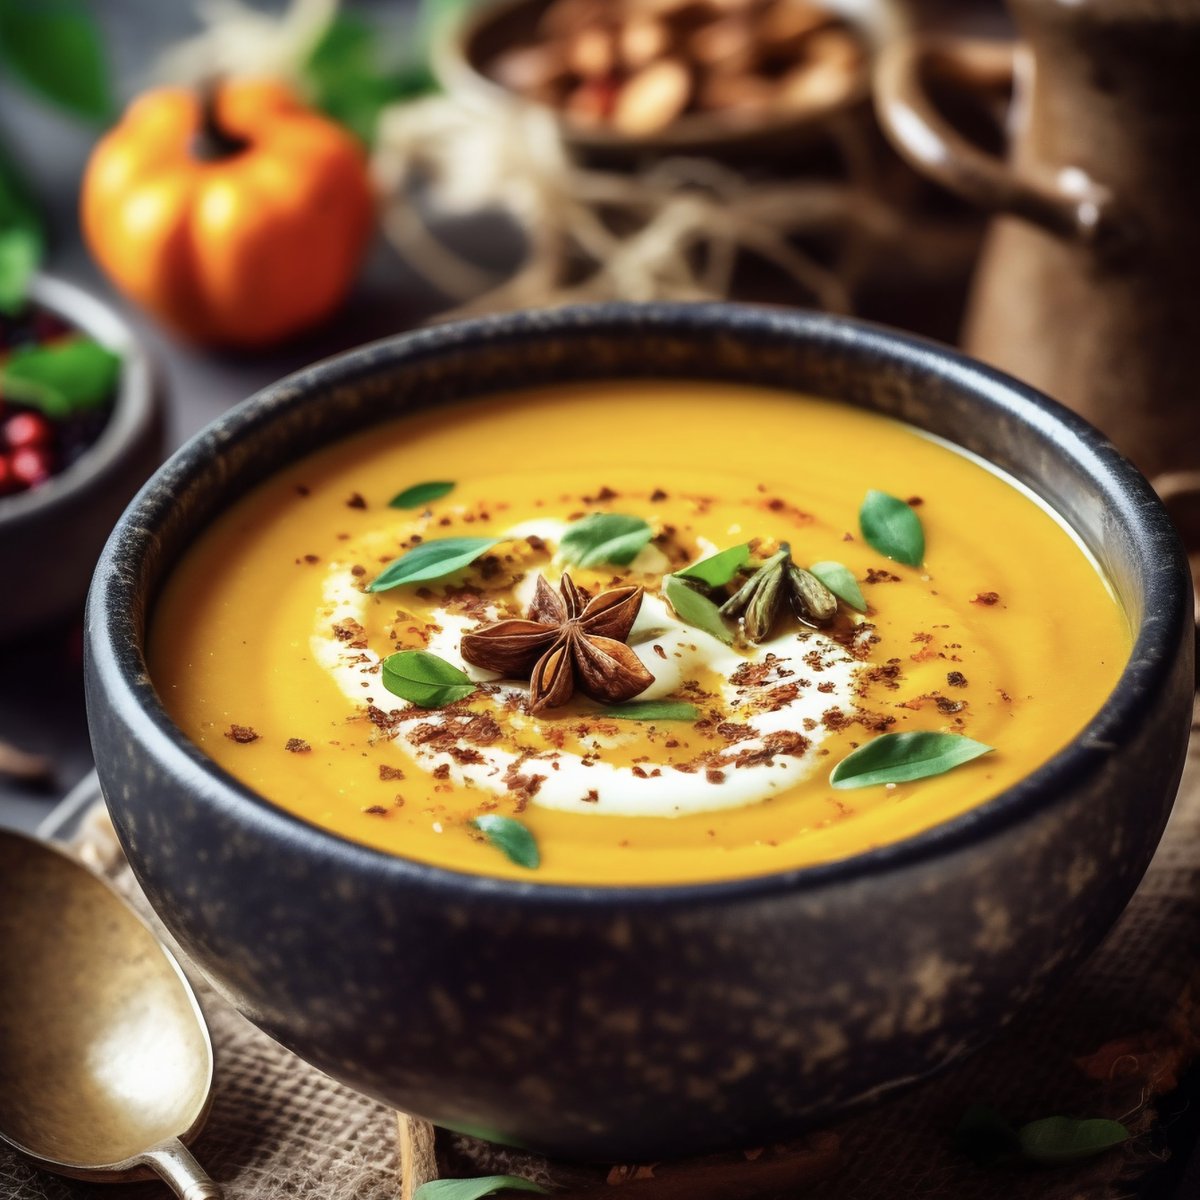 Pumpkin Coconut Soup Spiked with Star Anise

Get our free recipe app. Link in profile.

#SoupRecipe #PumpkinSoup #CoconutSoup #ComfortFood #HeartyMeal #TastyAndHealthy #SimpleSoupRecipe #CookingWithSpices #Soup #HealthyEating #HealthyFood #HealthySoup #HealthyCooking